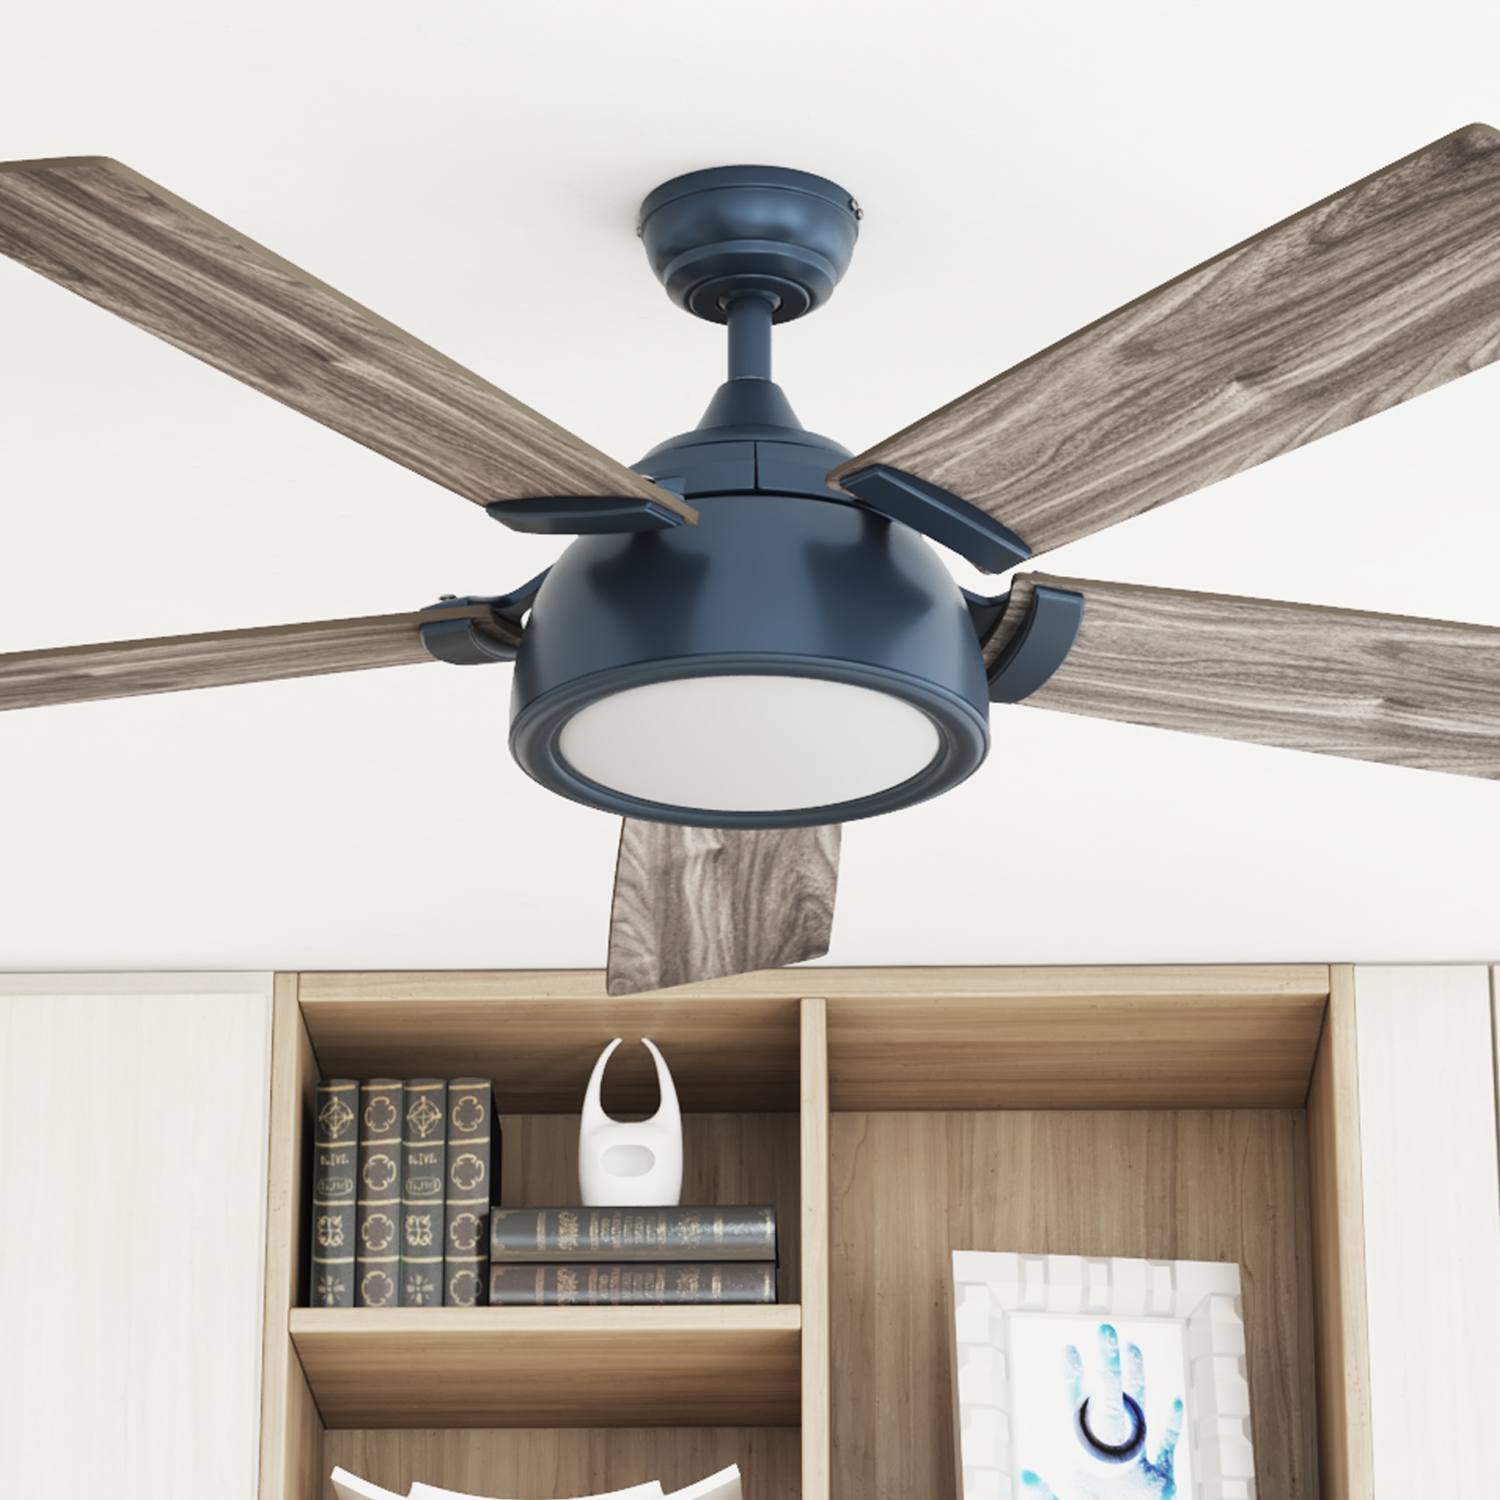 52 Inch Potomac, Sapphire Blue, Remote Control, Smart Ceiling Fan by Prominence Home